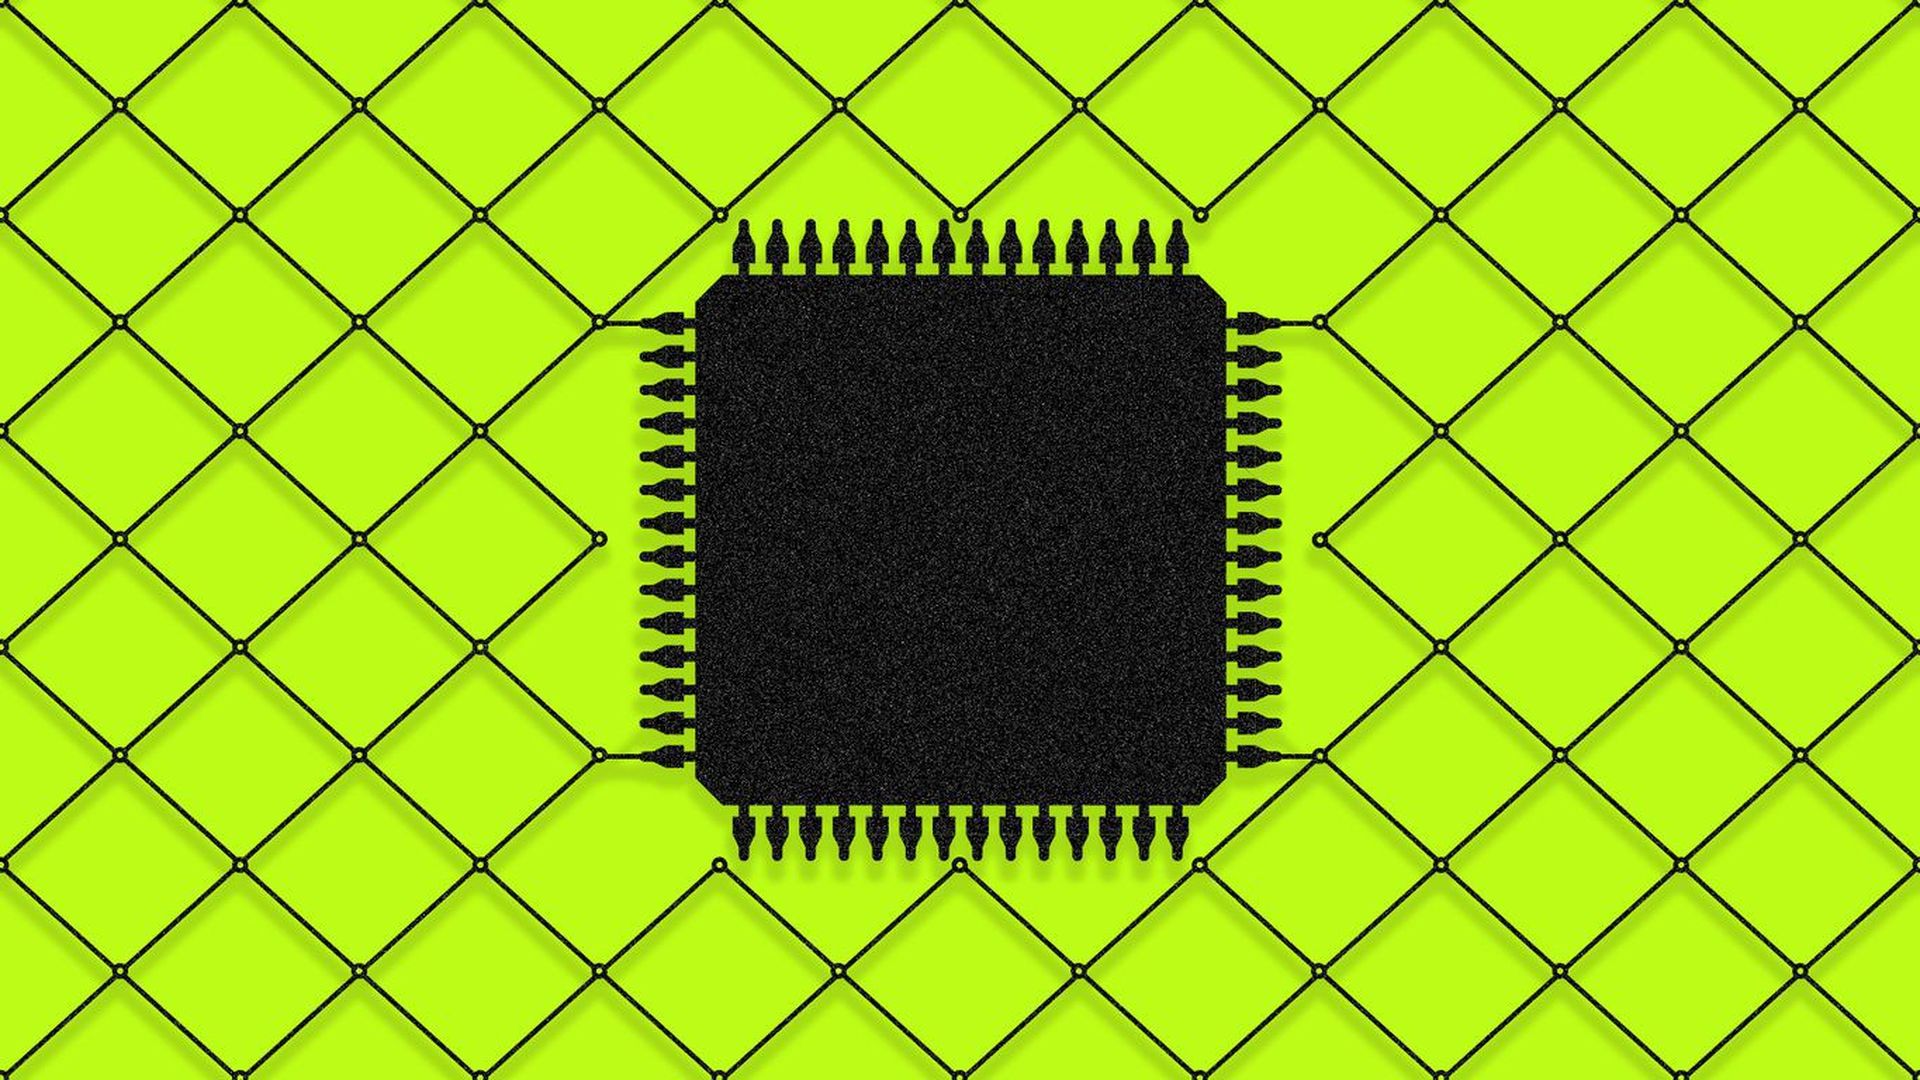 Illustration of a black microprocessor chip against a green grid